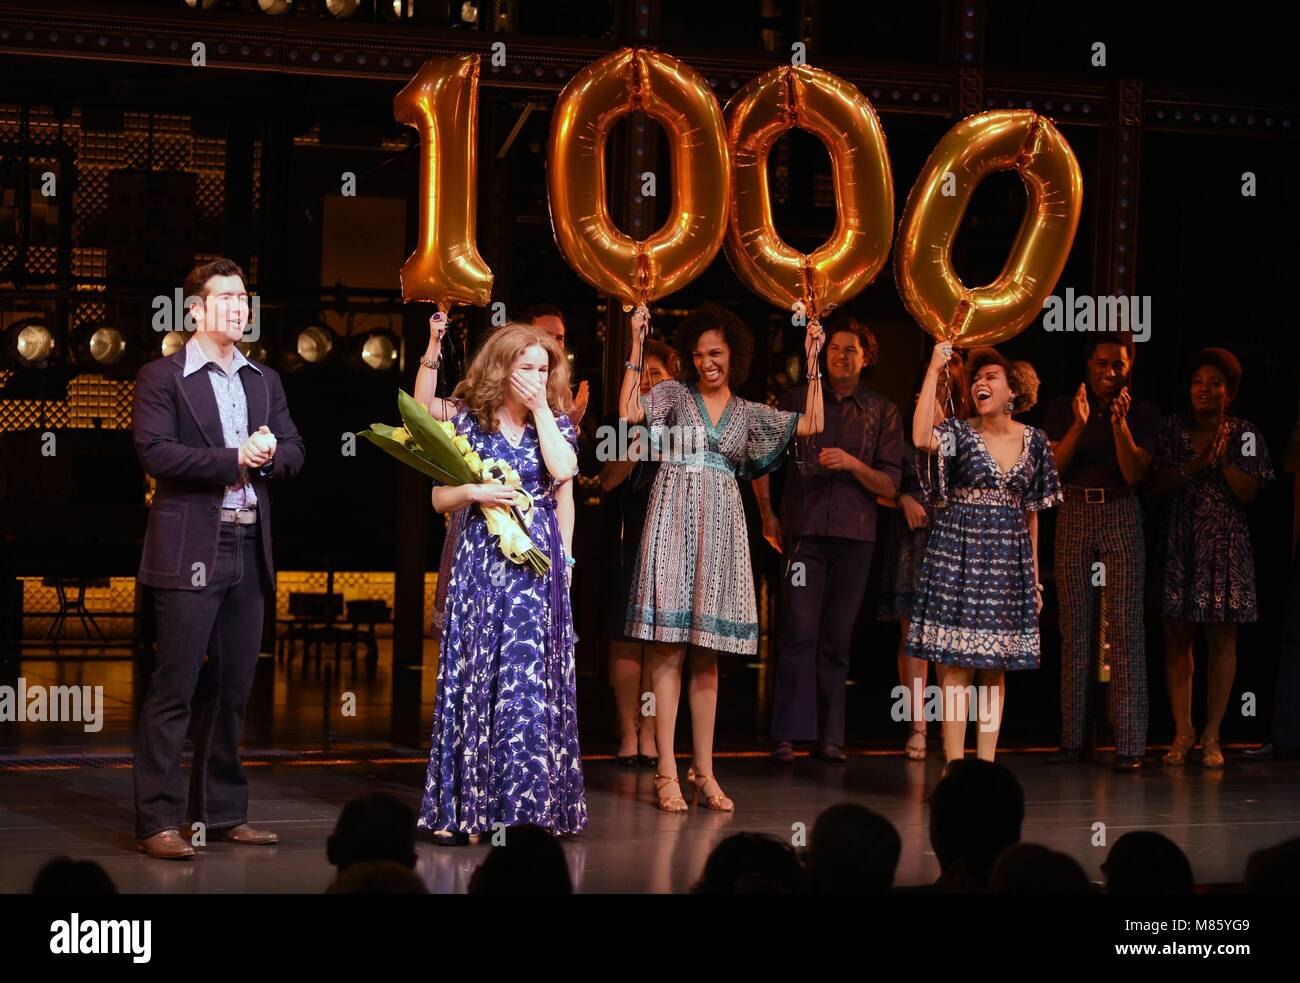 New York, NY, USA. 14th Mar, 2018. Chilina Kennedy Photo Call for Chilina Kennedy Celebrates 1000th Show in BEAUTIFUL - THE CAROLE KING MUSICAL, Stephen Sondheim Theatre, New York, NY March 14, 2018. Credit: Derek Storm/Everett Collection/Alamy Live News Stock Photo